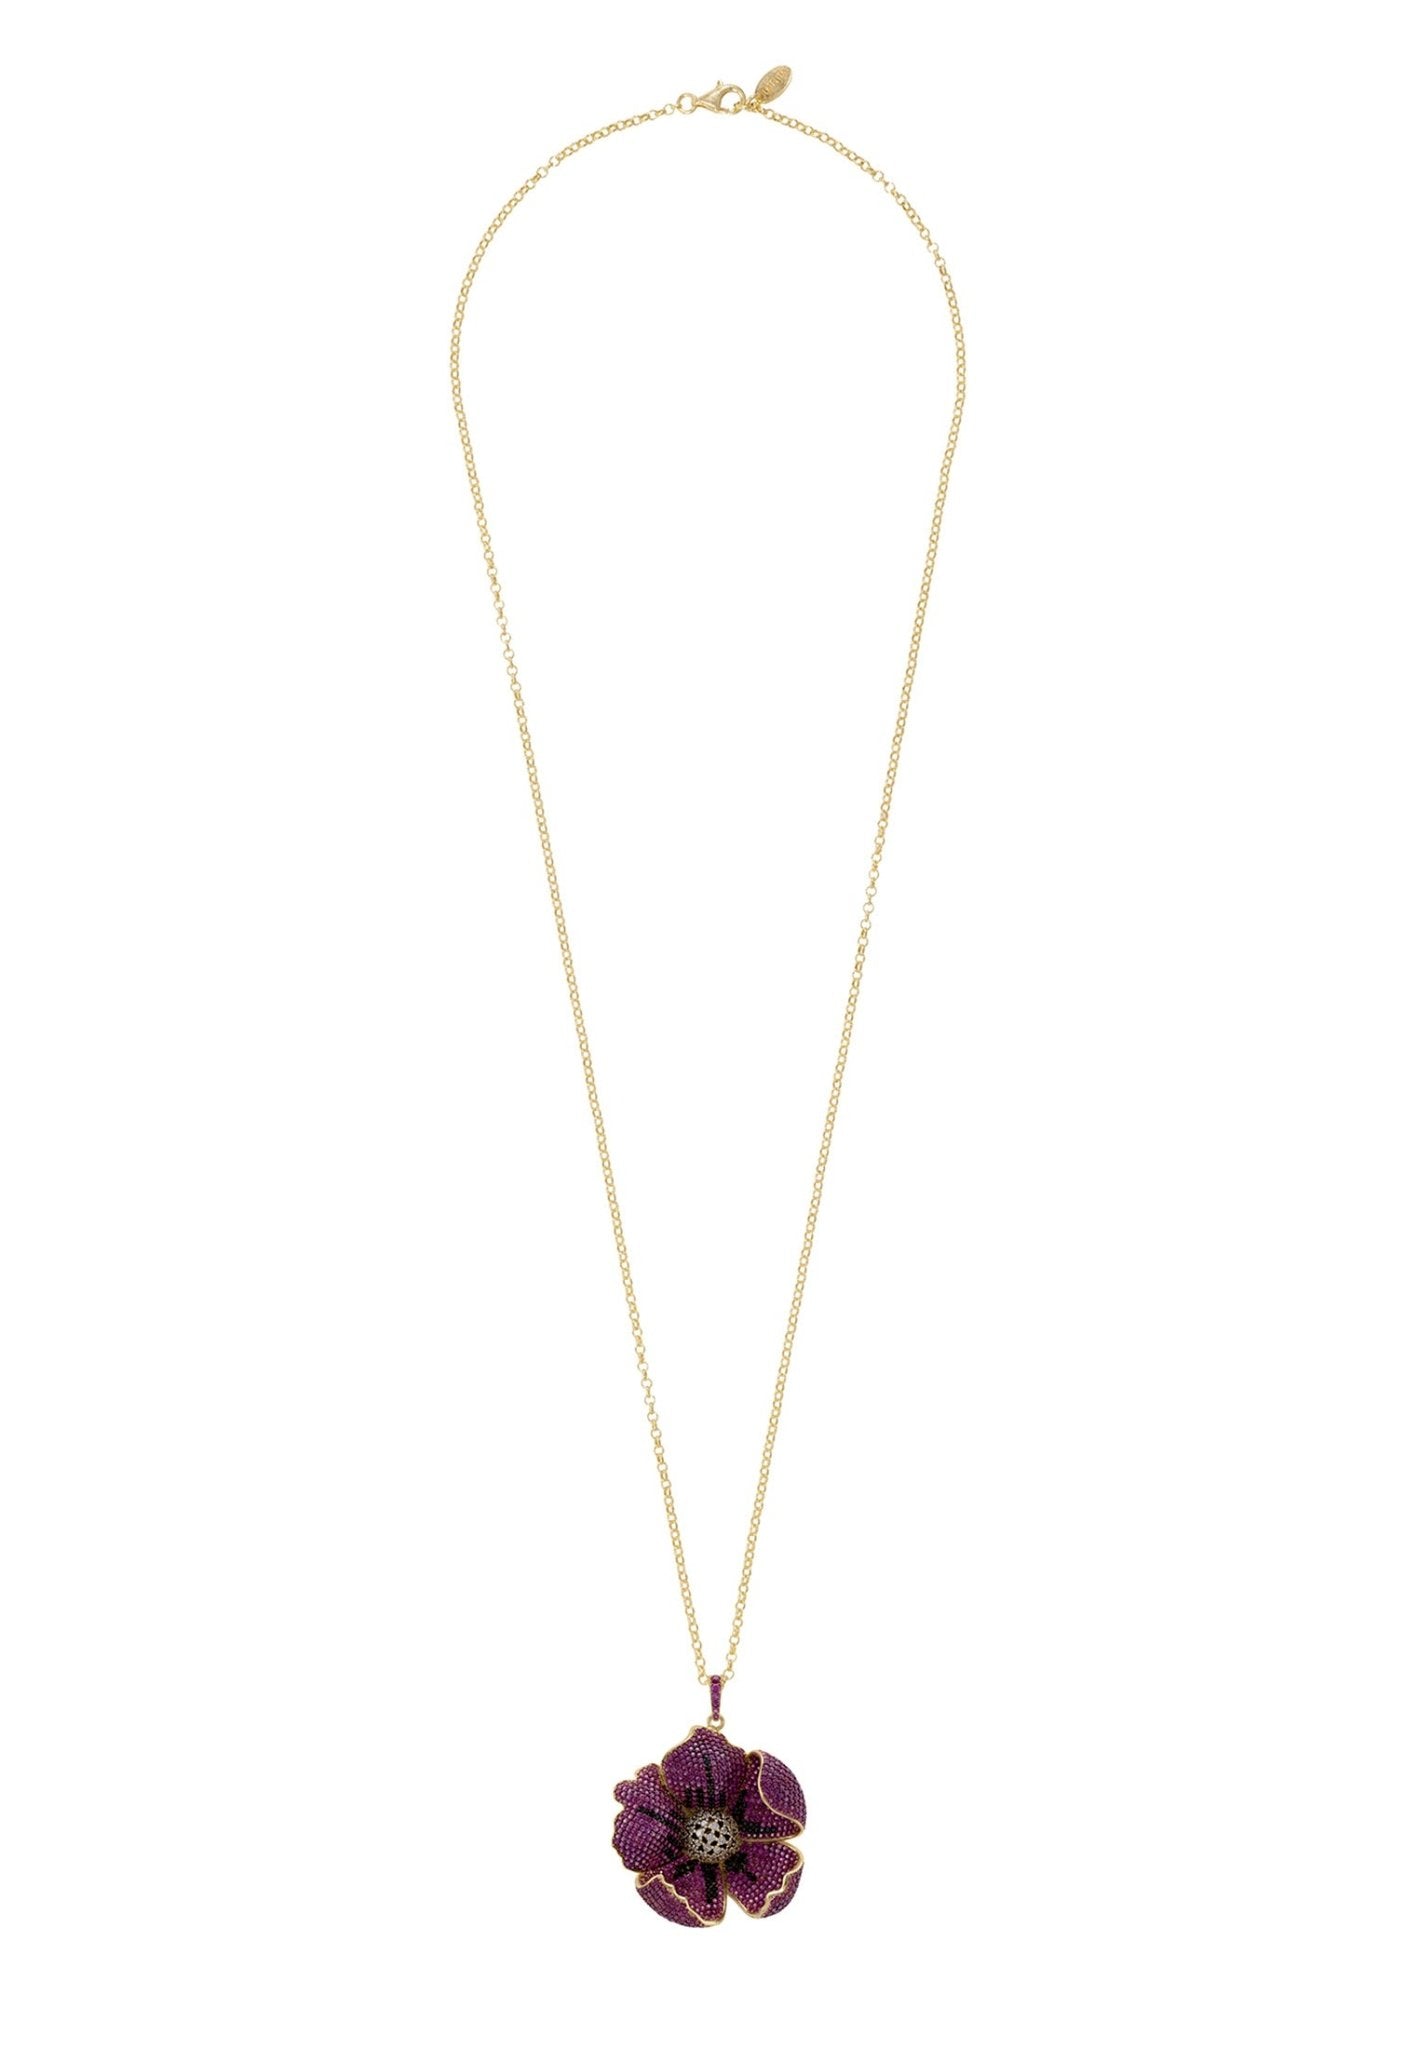 Poppy Pendant Necklace Gold Ruby Red Cz - LATELITA Necklaces